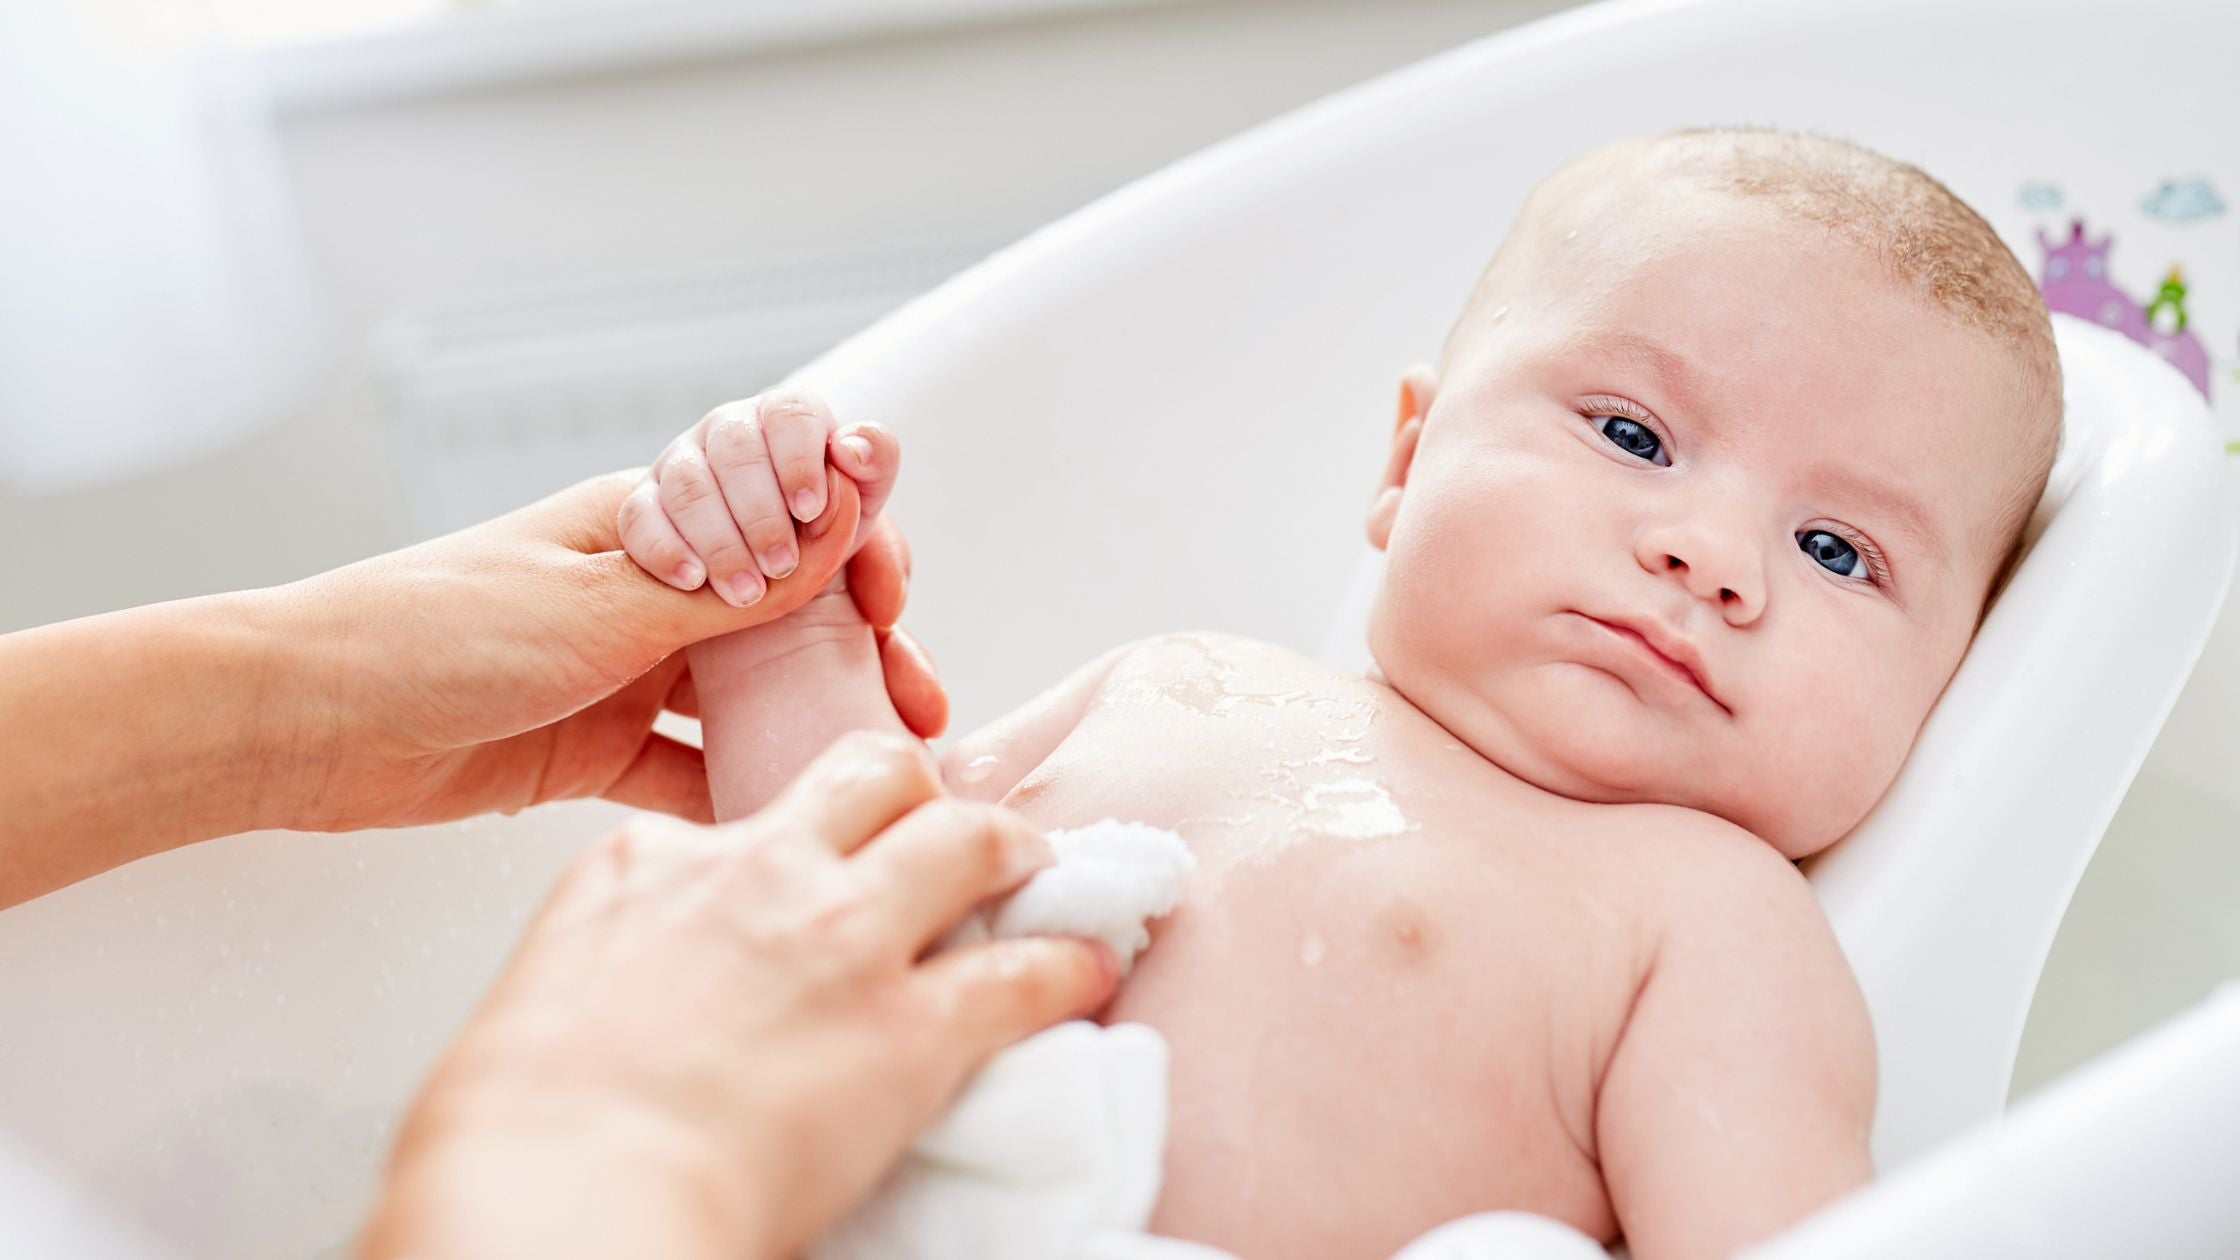 6 Tips on How To Bathe a Baby With Cradle Cap